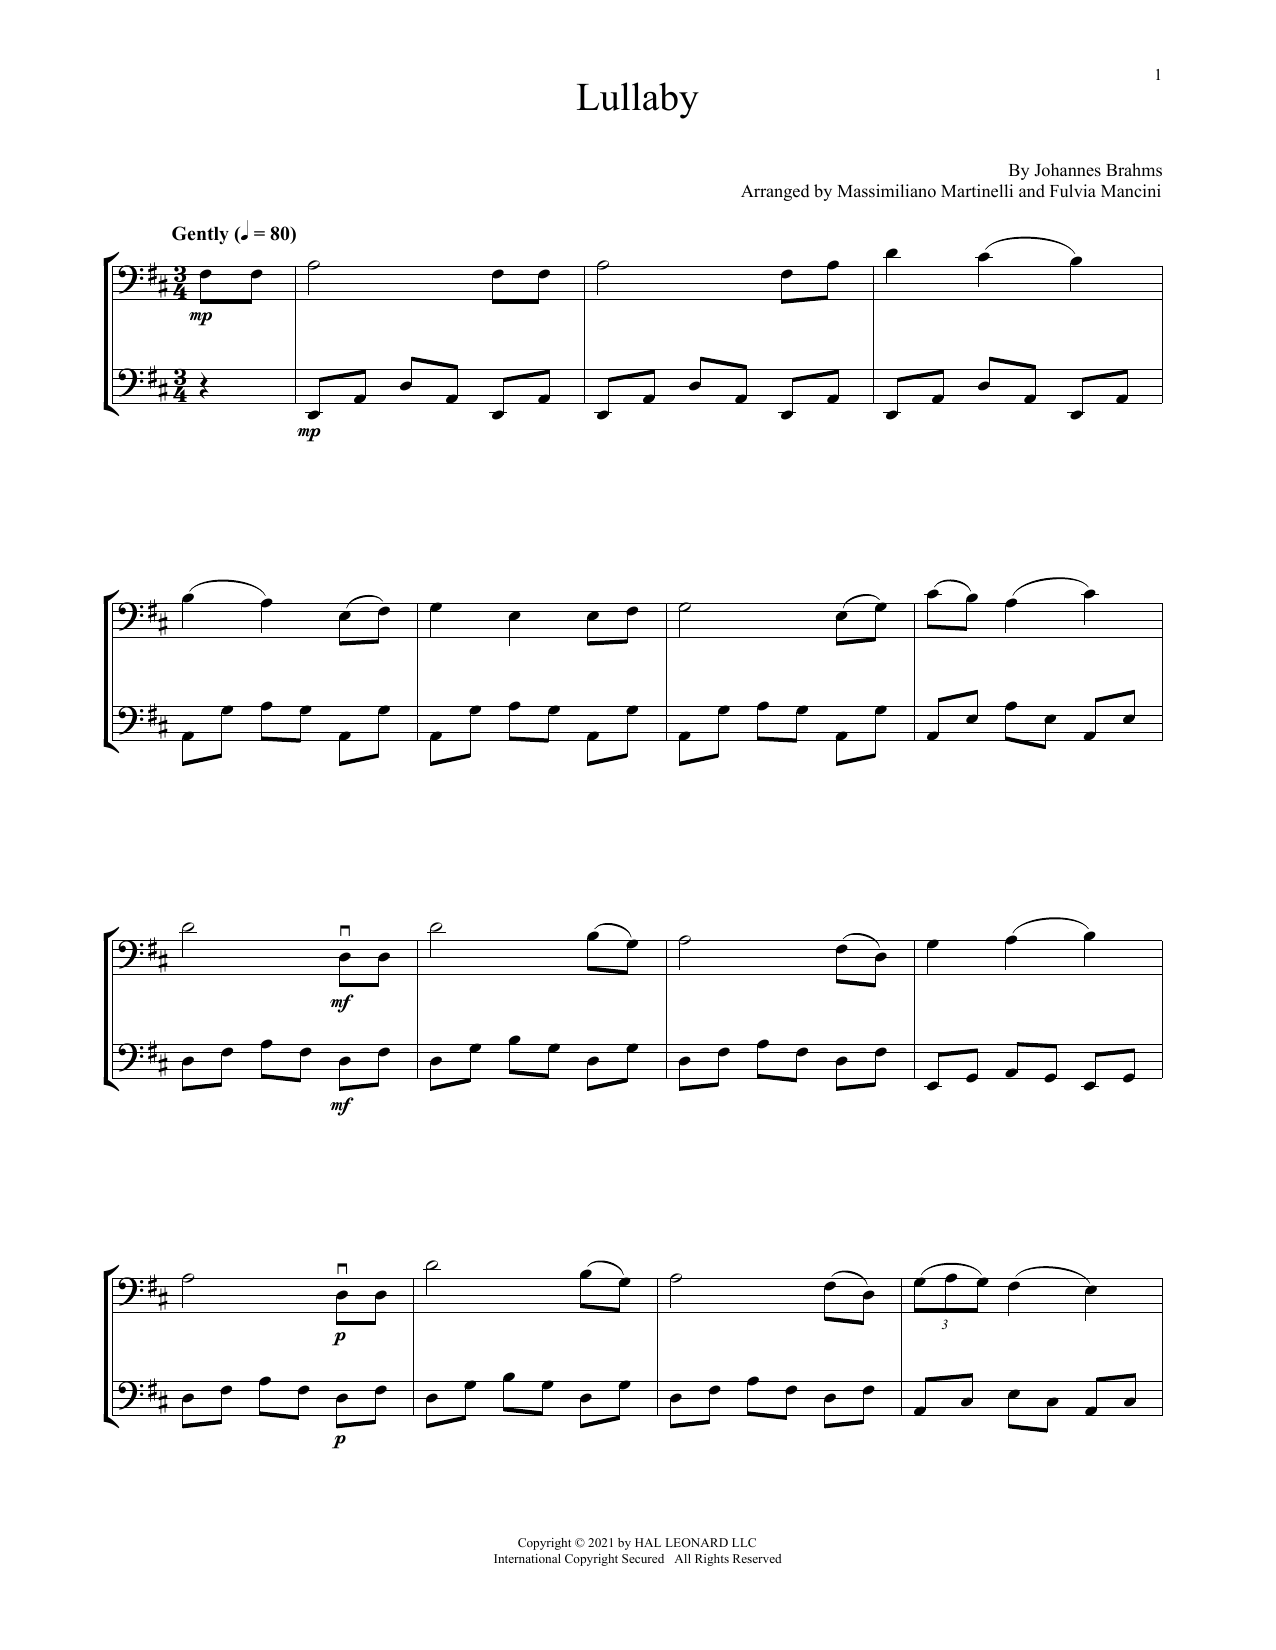 Download Mr & Mrs Cello Lullaby Sheet Music